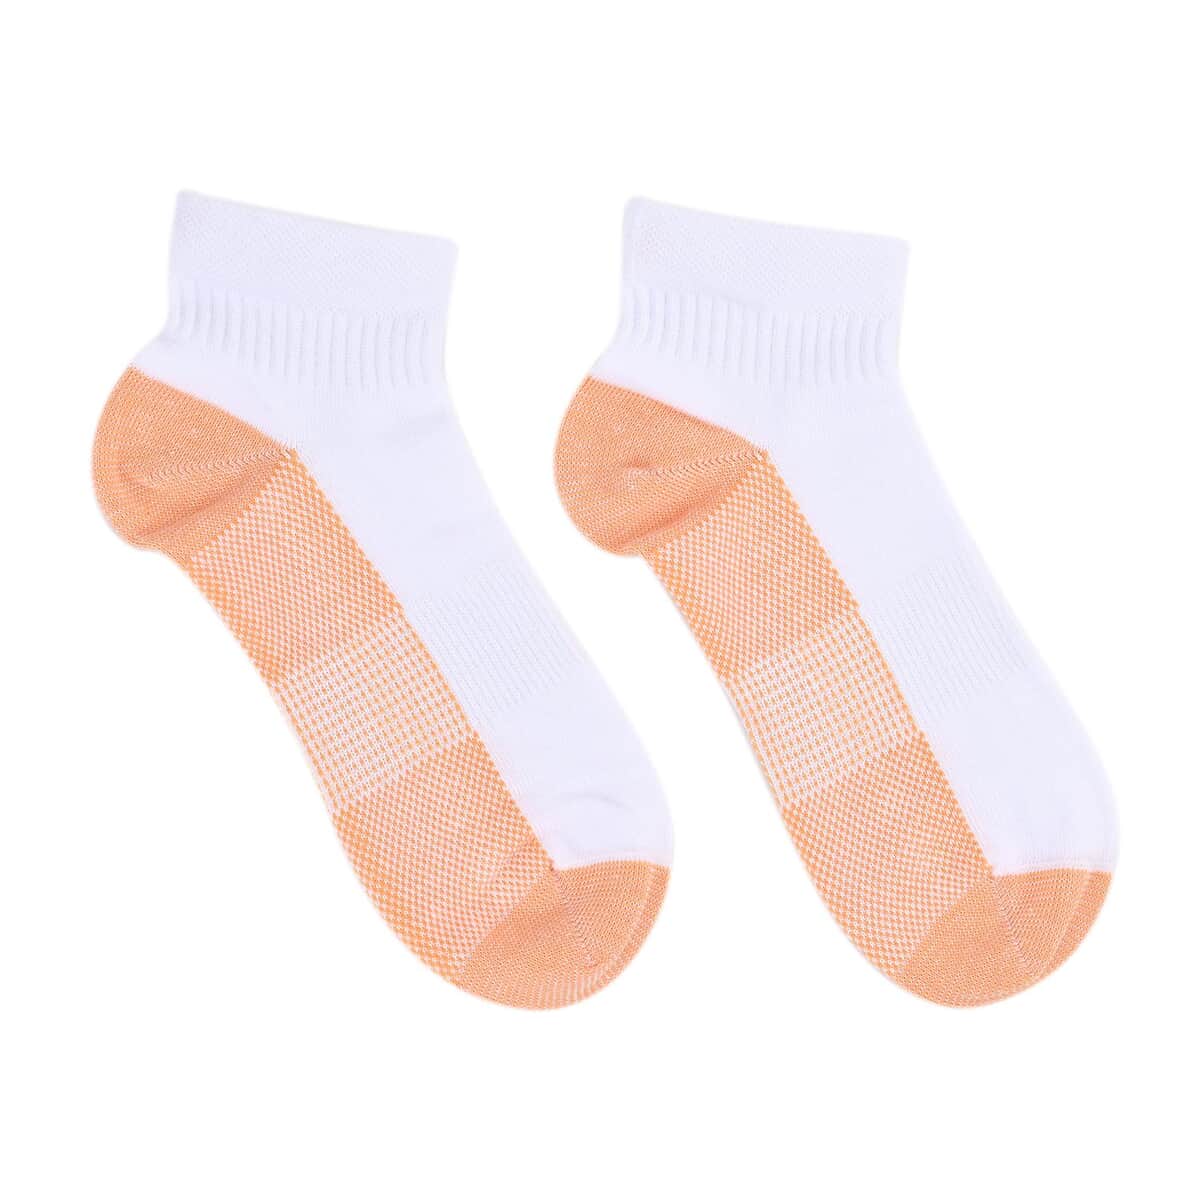 Set of 4 Pairs of Ankle Length Odor Free Copper Compression Socks For Men And Women, Premium Material Moisture Wicking Unisex Copper Infused Socks - Gray, Brown, Blue and White (S/M) image number 4